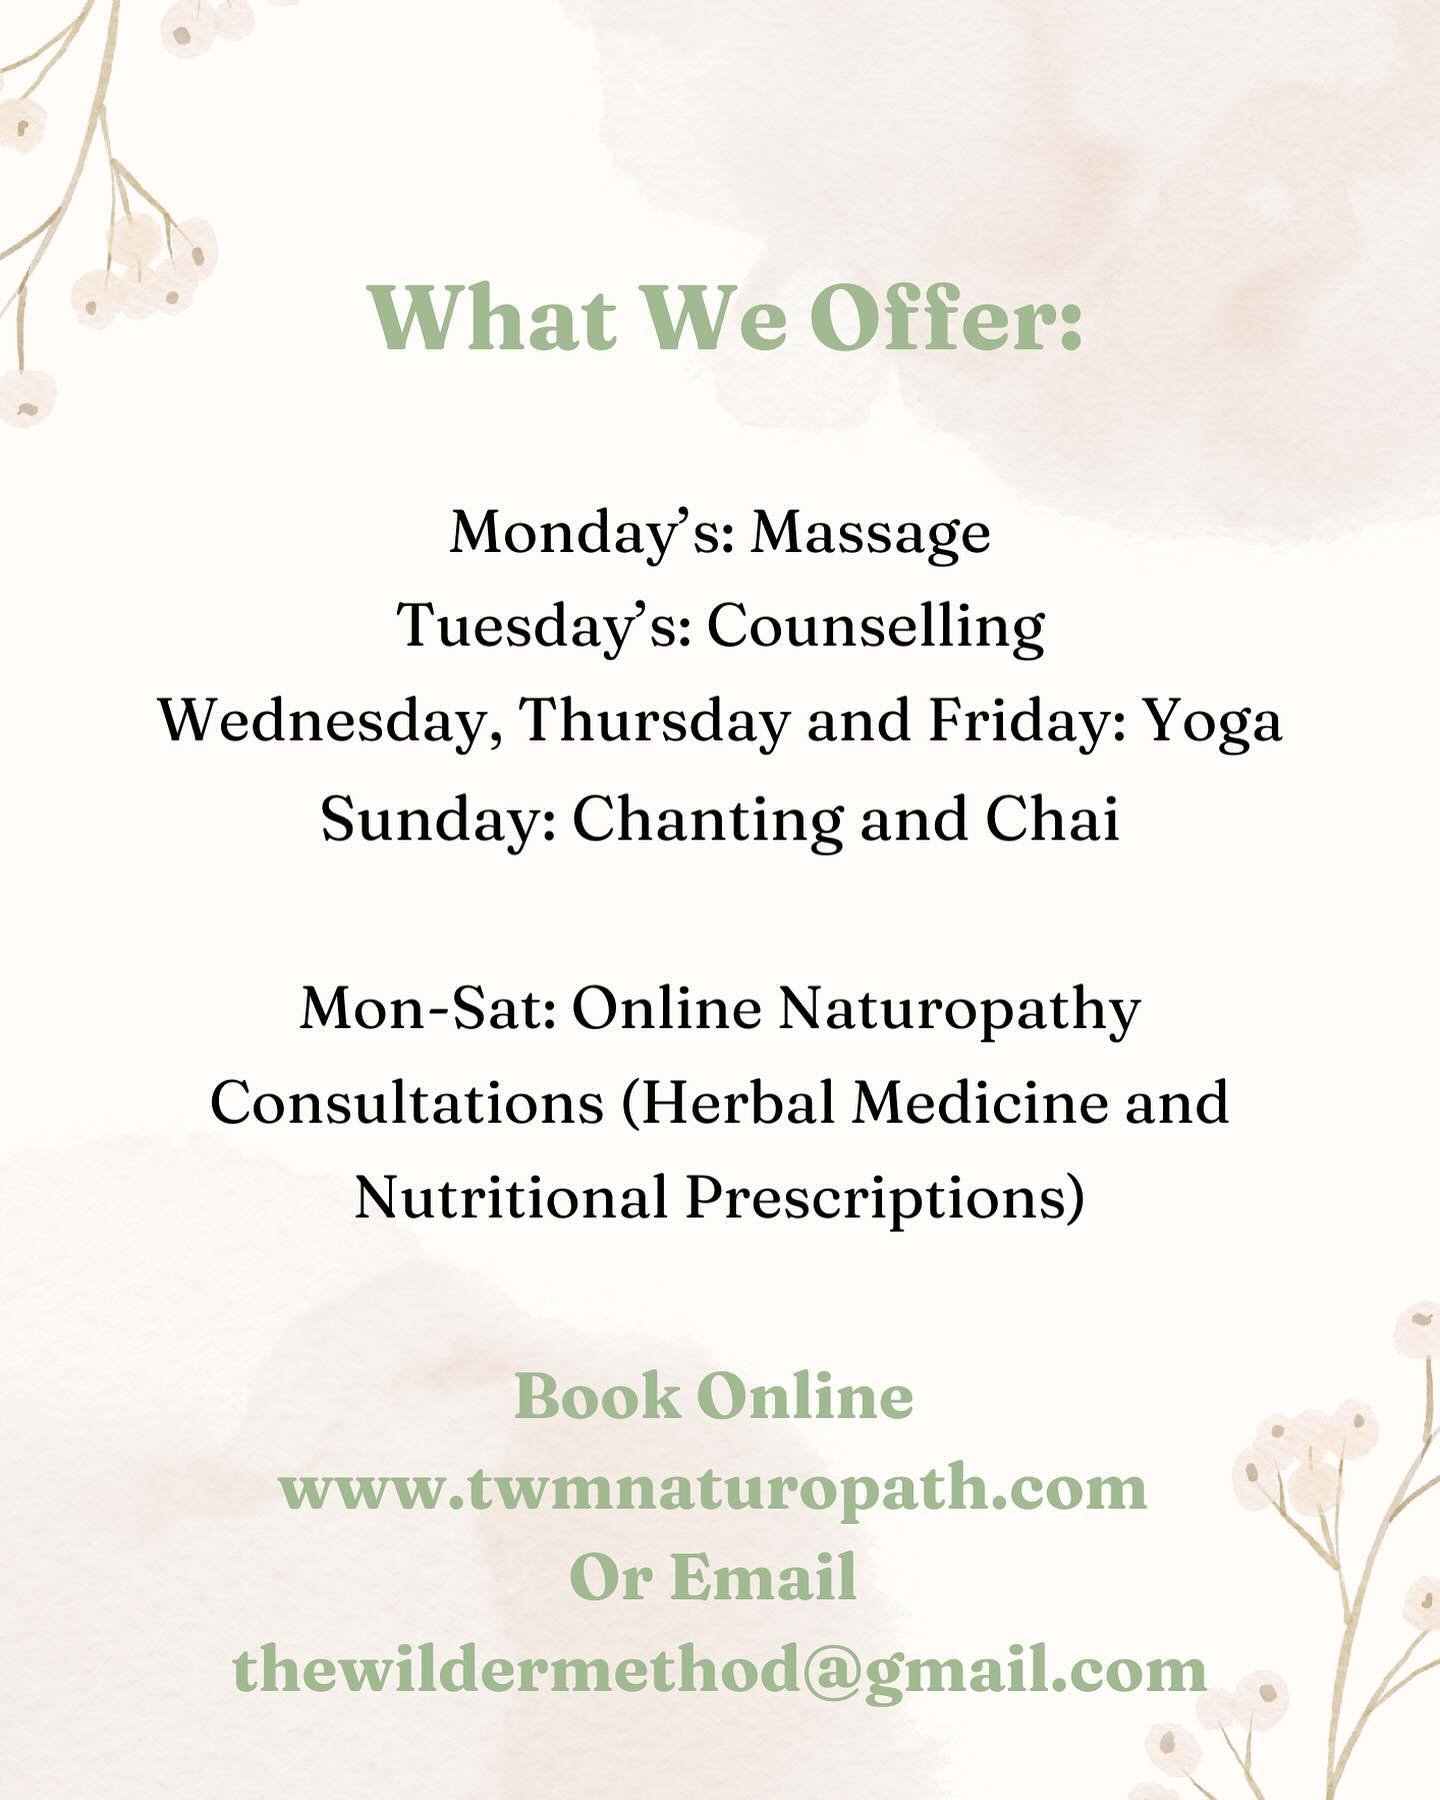 New Program!

@vitalityremedial Massage available on Mondays - info on the website.

@wholeawarenesscounselling is available Tuesday, call Bec on 0425 911 919.

Jess and Alice will be alternating Wednesday Yoga classes (in person and online) - info o